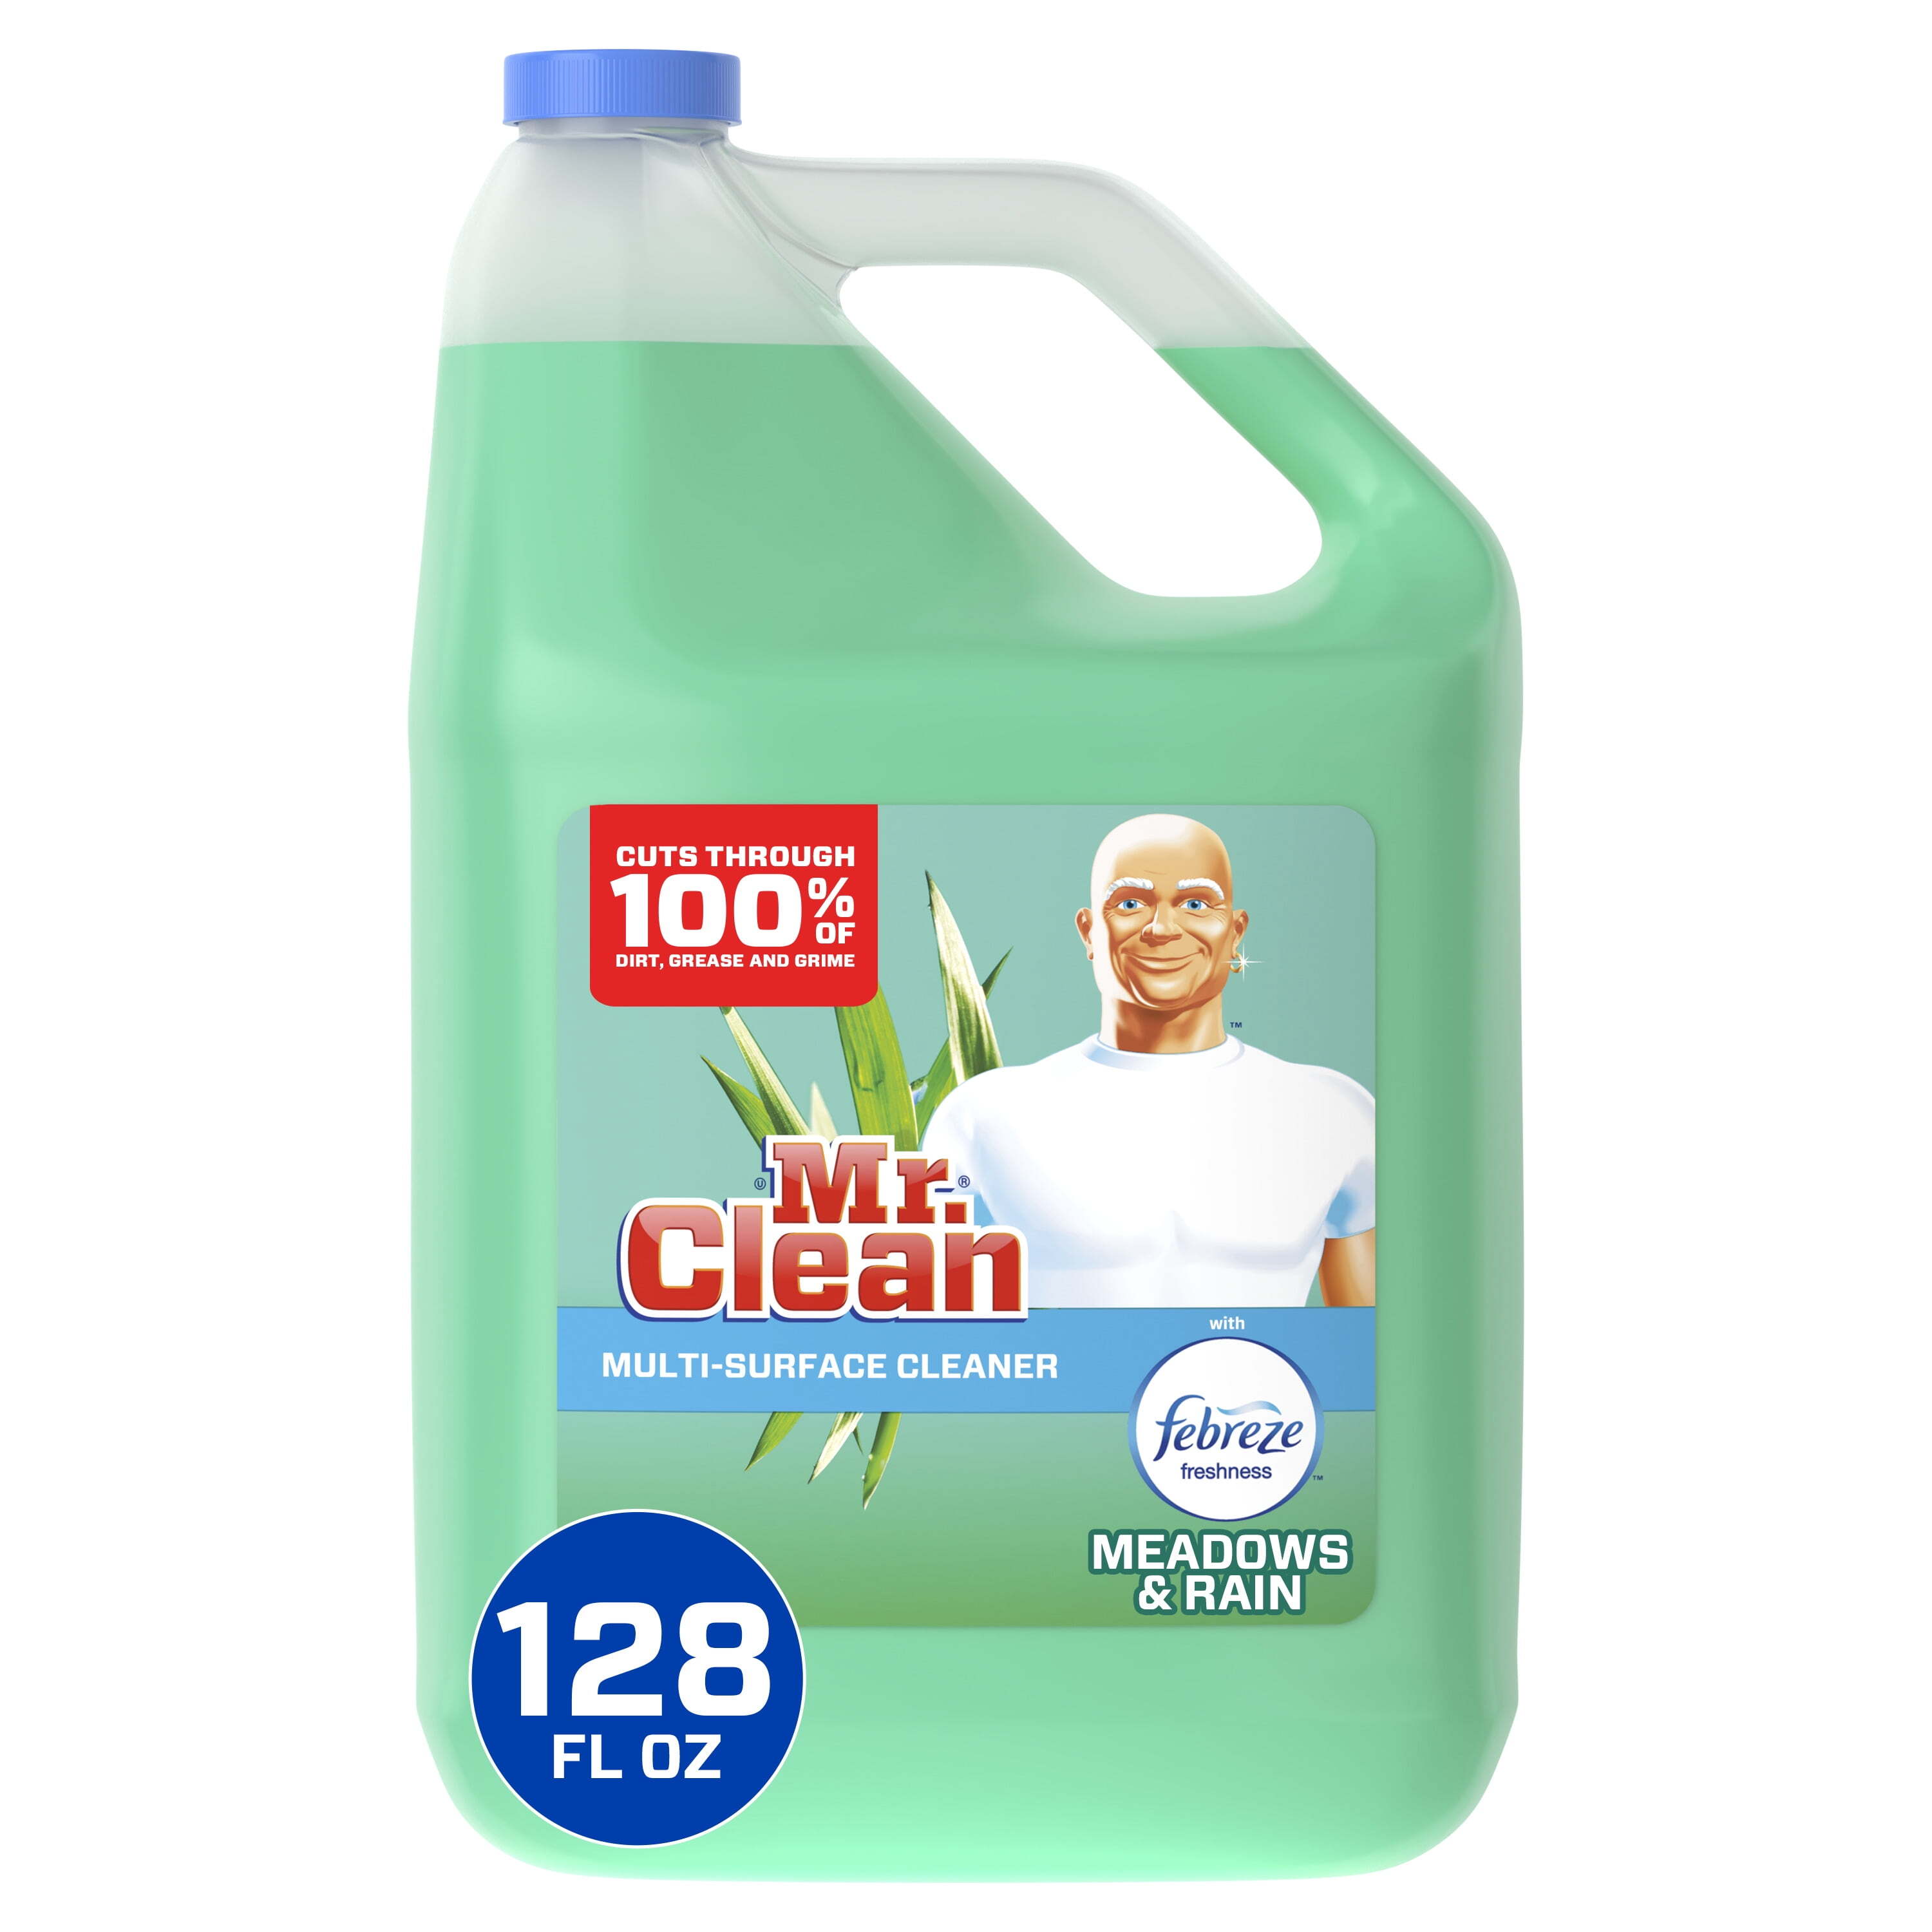 Mr. Clean Multi-Surface Cleaner with Febreze Freshness, Meadows & Rain, 128 fl oz - image 1 of 6